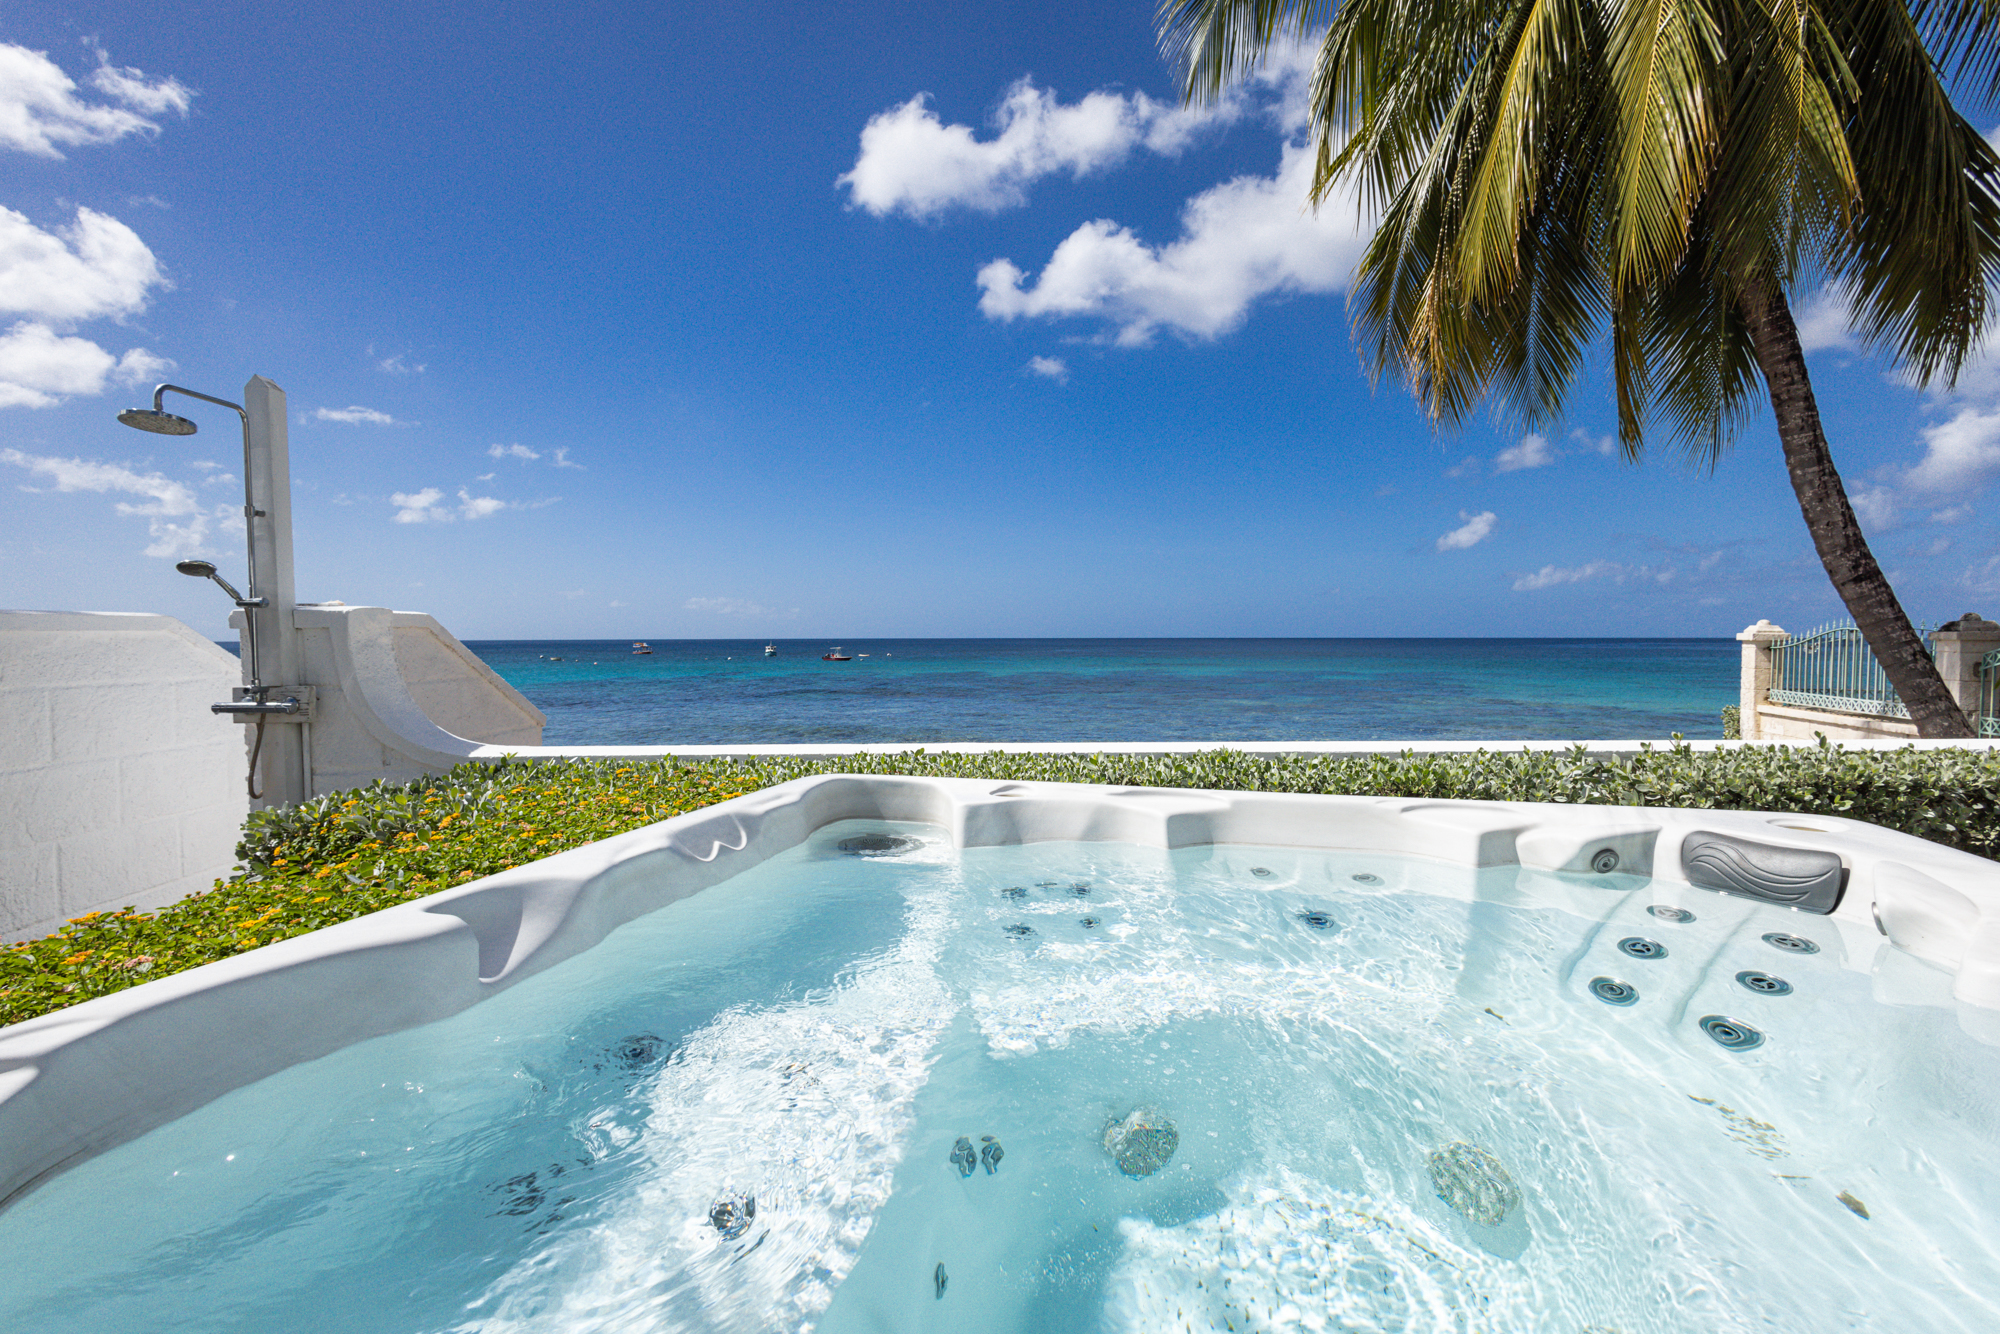 Barbados luxury beachfront villa view from jacuzzi in the garden with Caribbean Sea view beyond